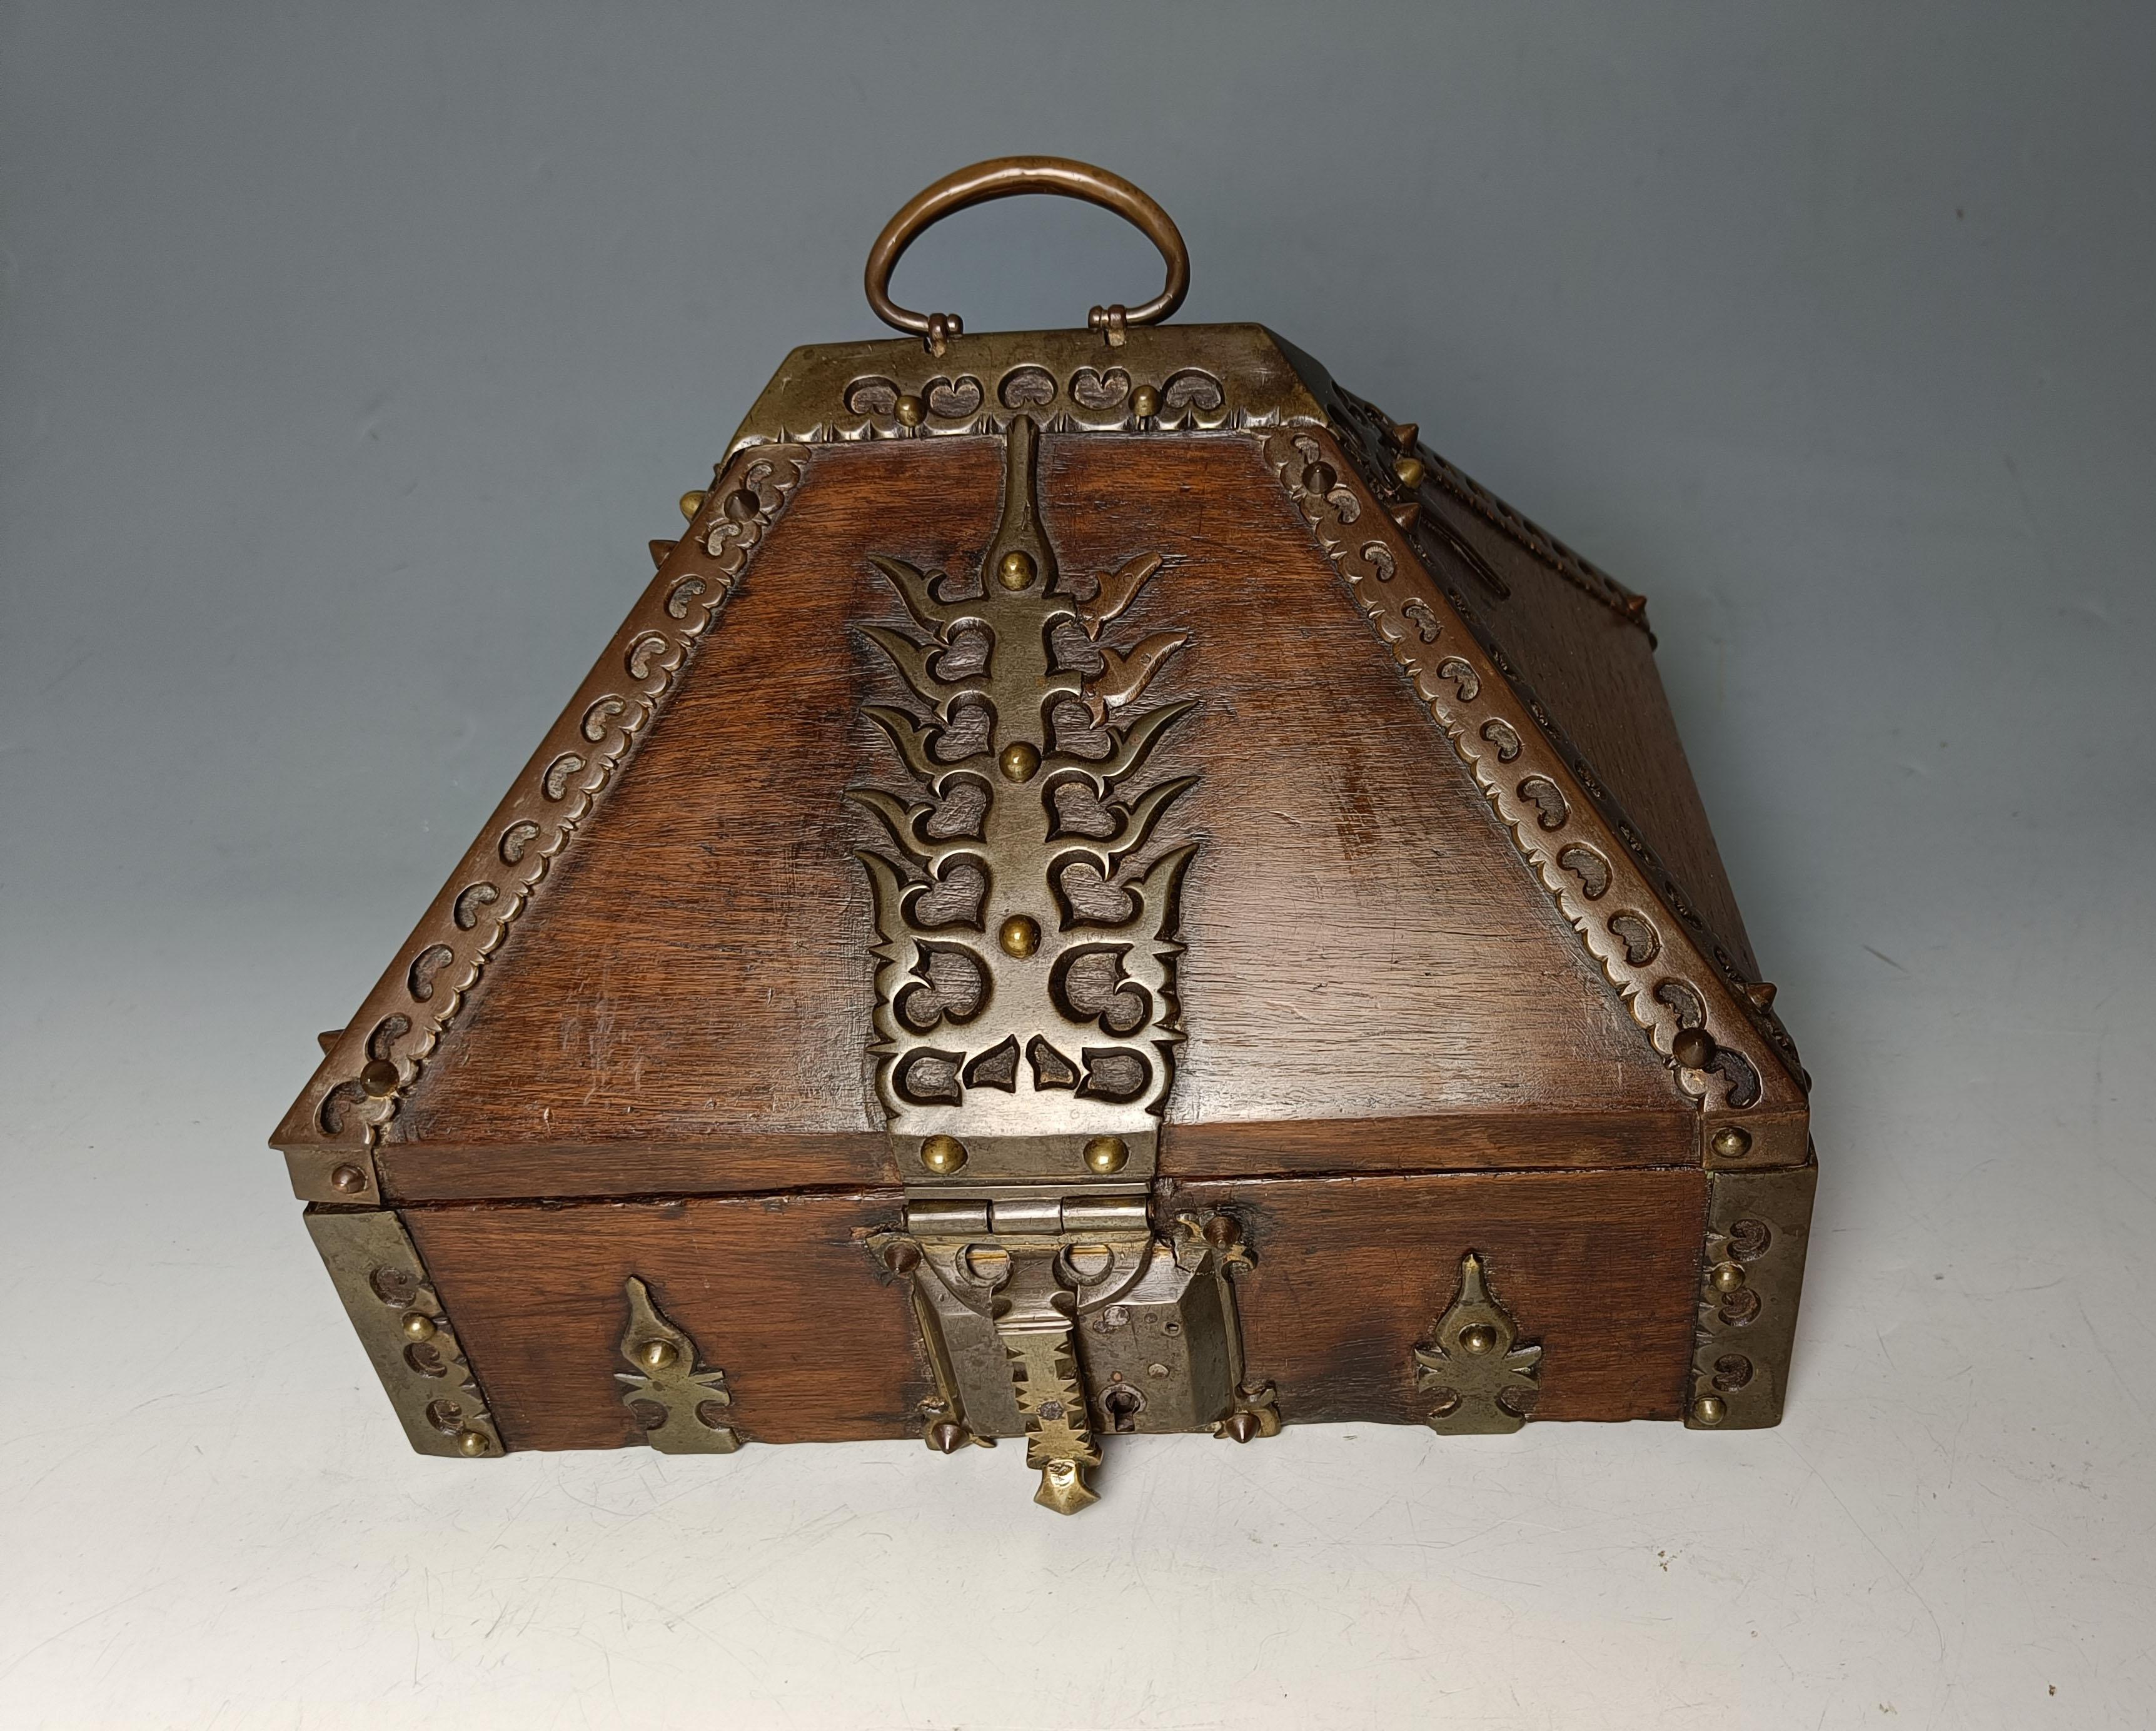  
A Superb Large Antique South Indian Kerala dowry box
This Fine example shows a vast amount of patinated brass ornamentation decoration . internally there is one sub division. The main construction is of solid teak

This beautiful late 19th century